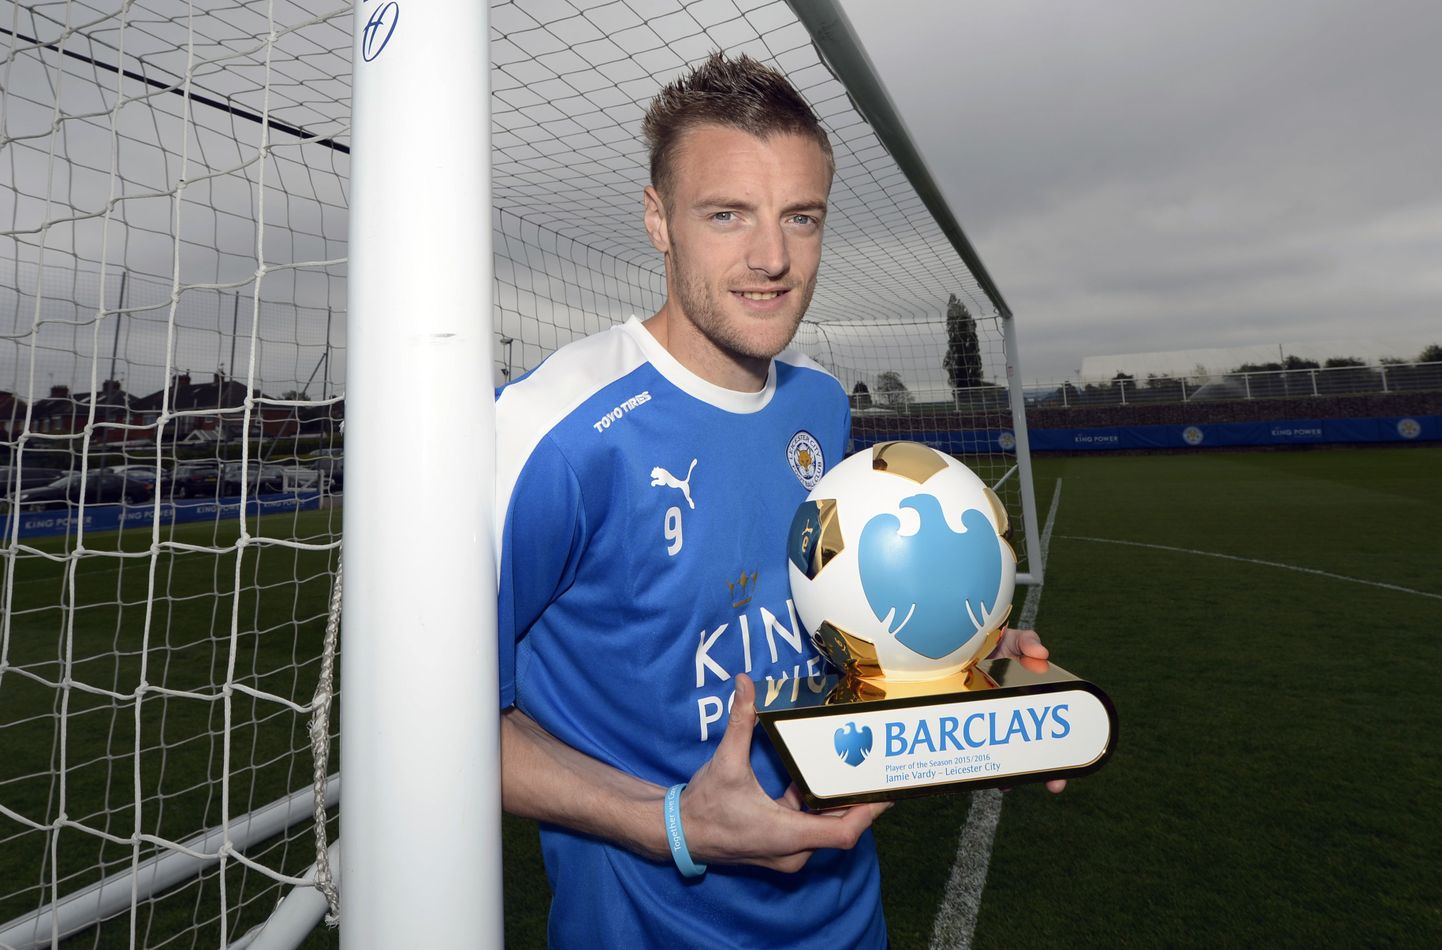 Britain Football Soccer - Leicester City's Jamie Vardy wins the Barclays Player Of The Season Award - Leicester City Training Ground - 13/5/16
Leicester City's Jamie Vardy wins the Barclays Player Of The Season Award
Action Images via Reuters / Adam Holt
Livepic
EDITORIAL USE ONLY.